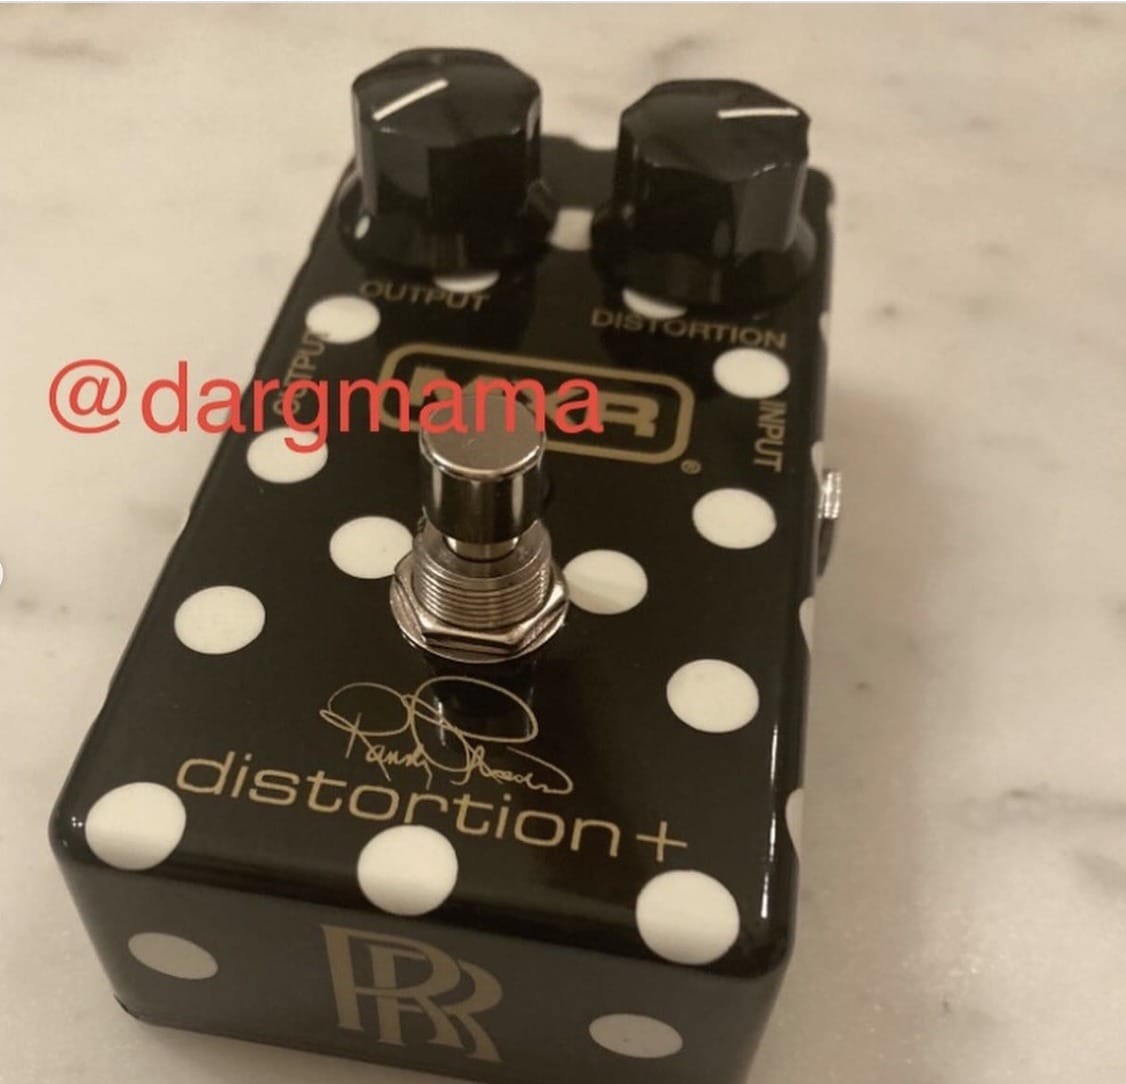 Anticipation Builds for MXR's Randy Rhoads Signature Distortion+ Pedal